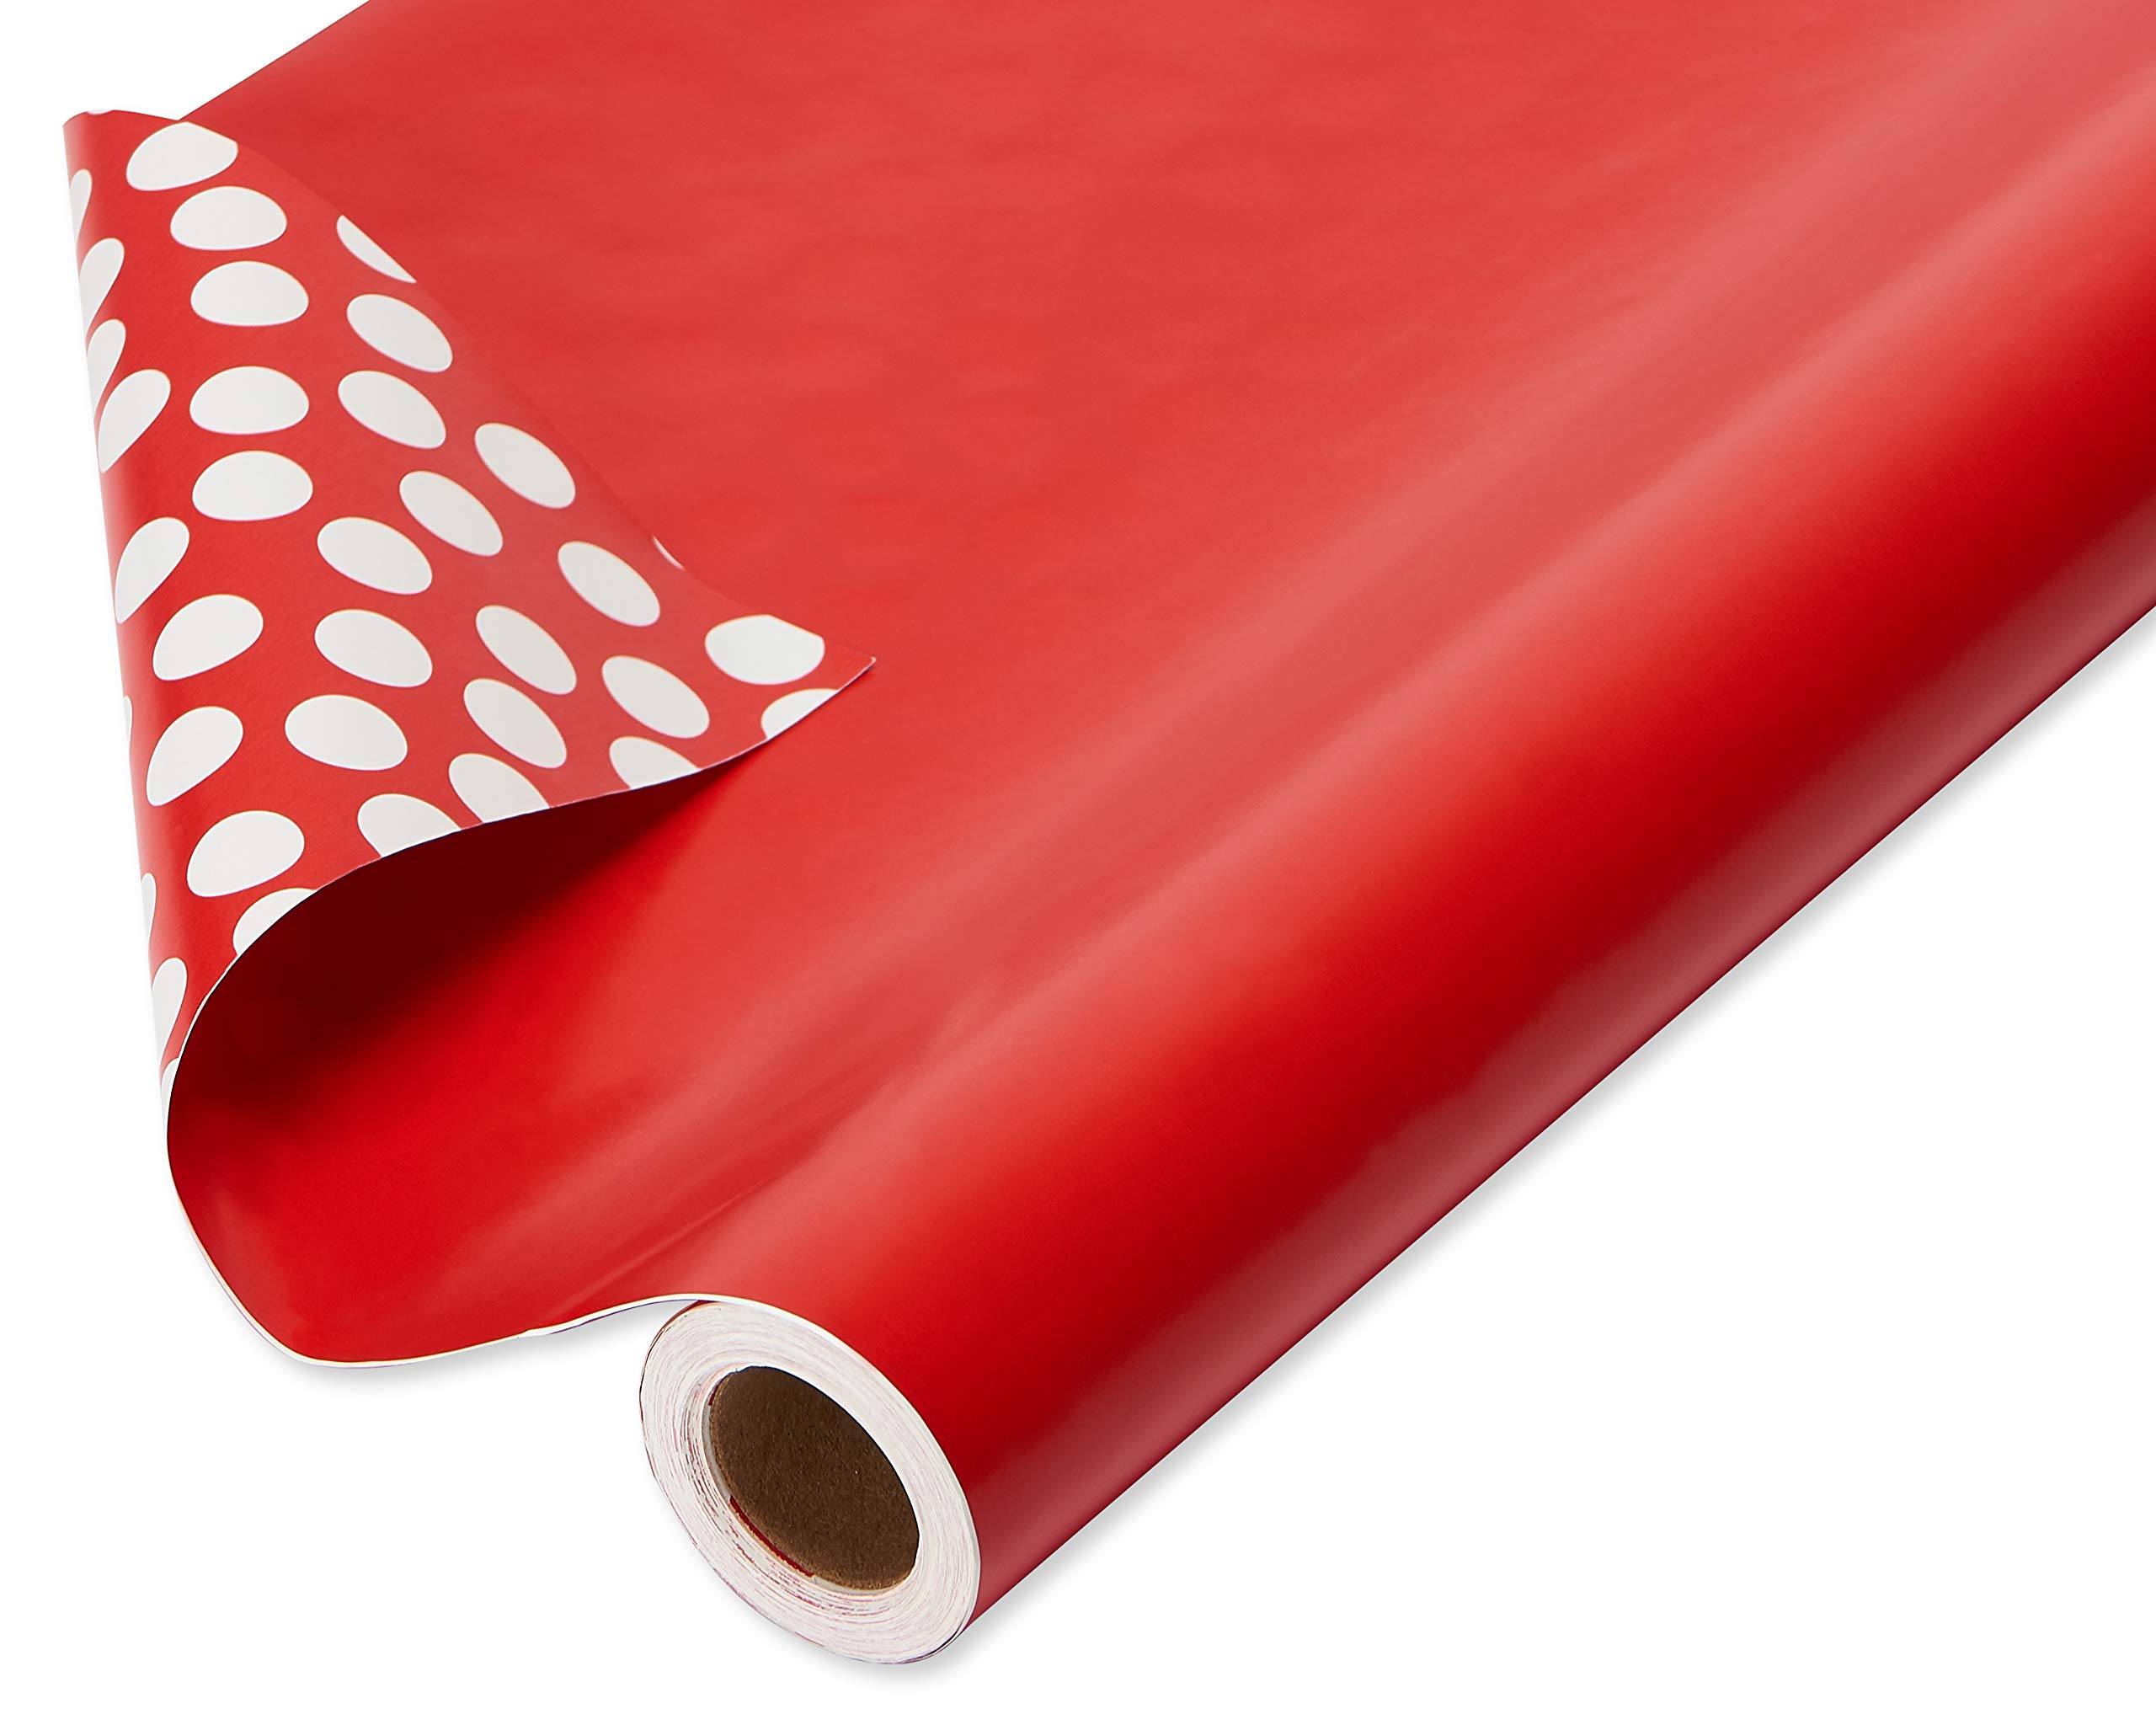 American Greetings Reversible Wrapping Paper Jumbo Roll for Birthdays, Graduation and All Occasions, Red and White Polka Dots (1 Roll, 175 sq. ft.)